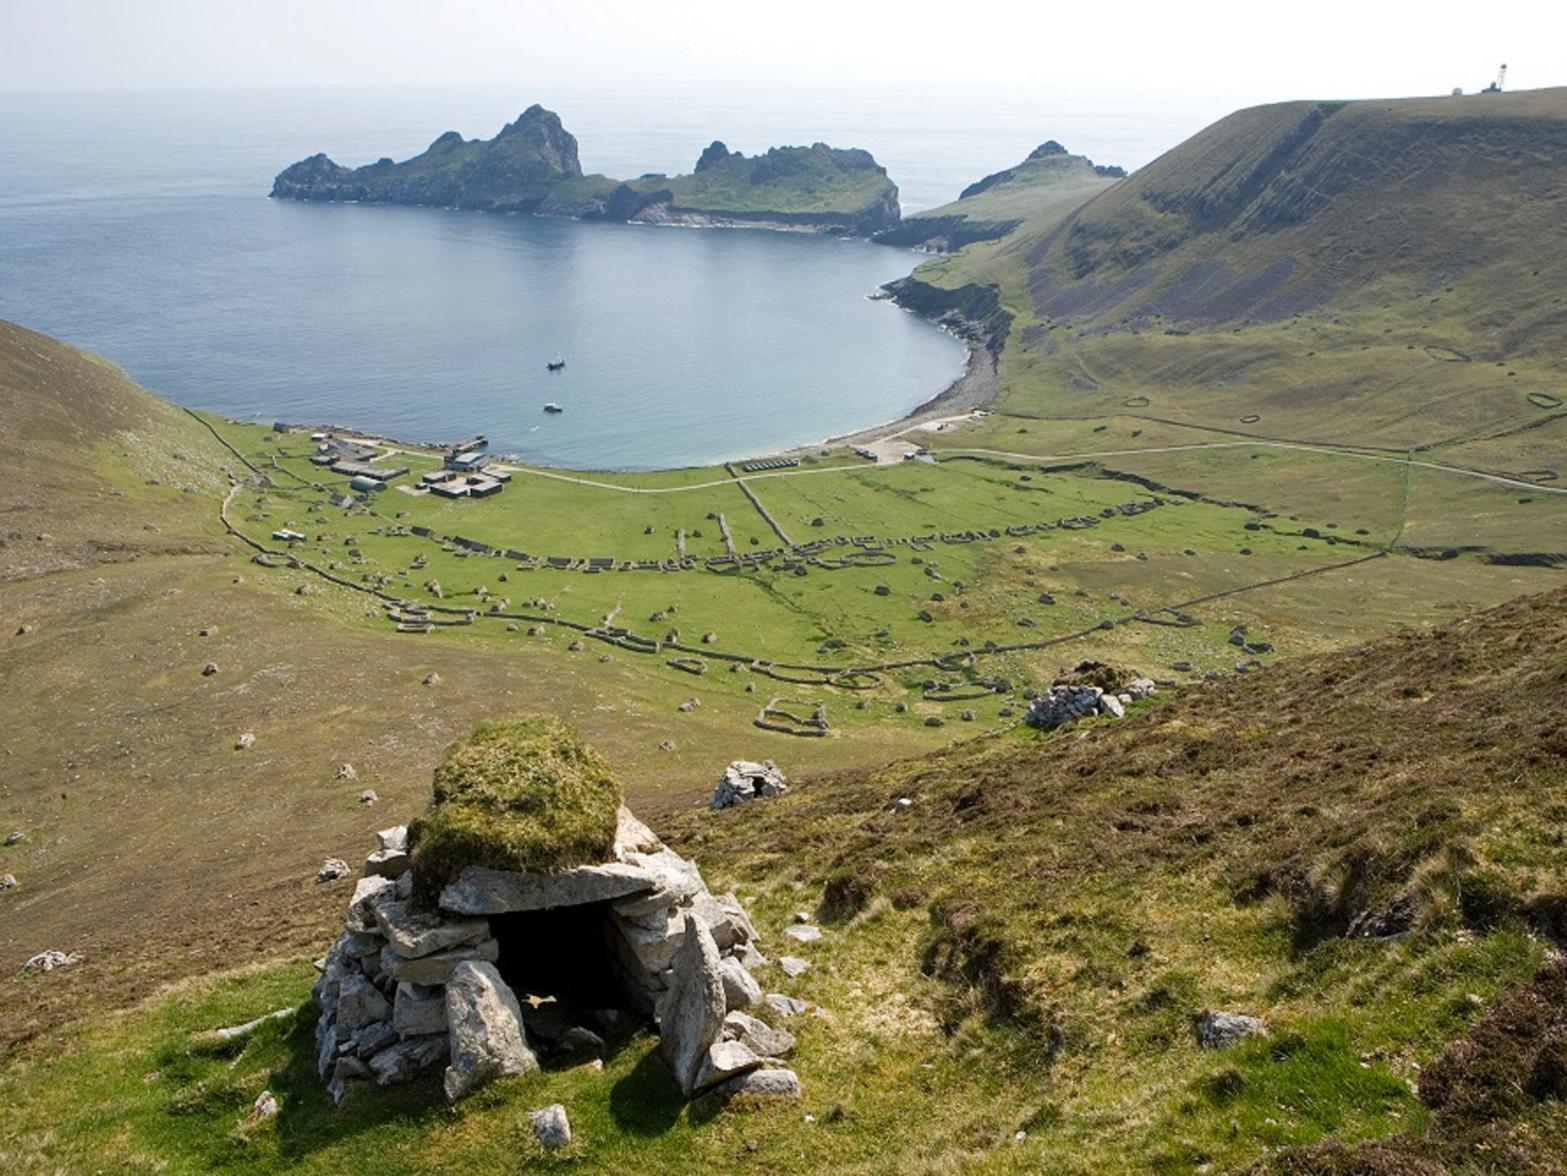 St Kilda sits around 40 miles west of its nearest neighbour in the Outer Hebrides. First visited around 4,000 years ago, its last permanent residents were evacuated in 1930 as life got too tough. Today it is home to MOD staff and conservationists.